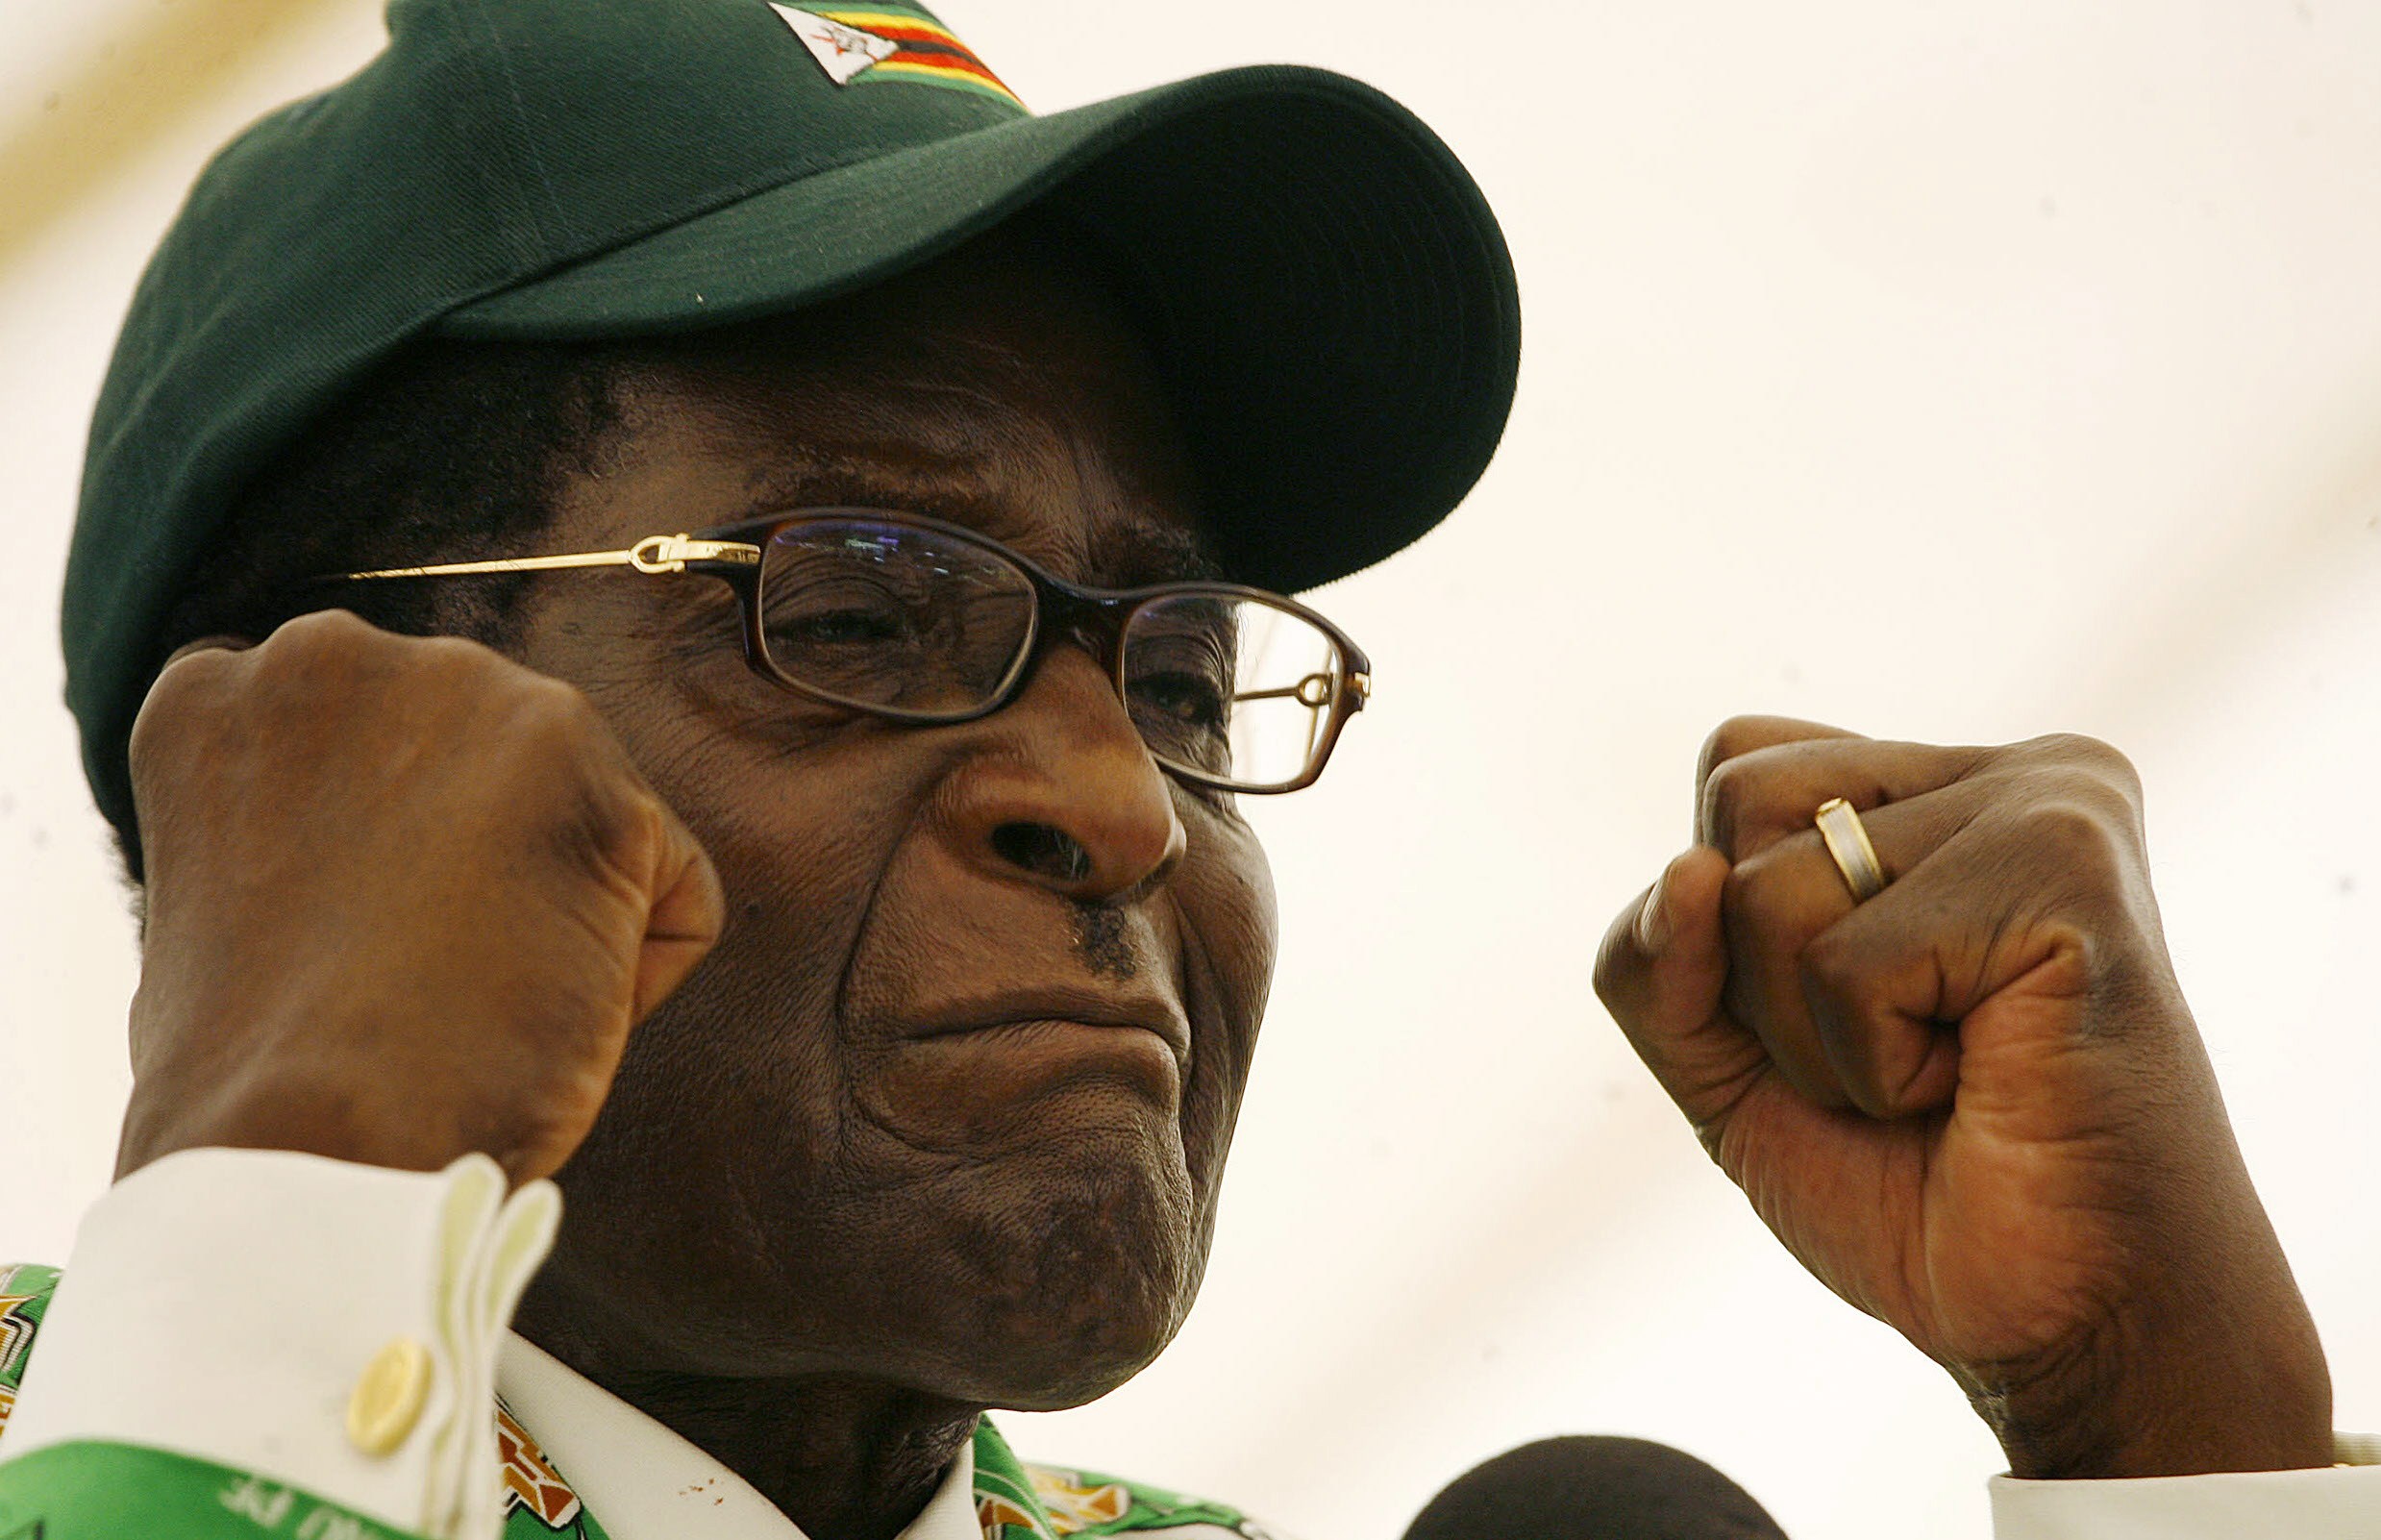 Robert Mugabe, pictured wearing a cap and clenched fists, during 2008 election rally  